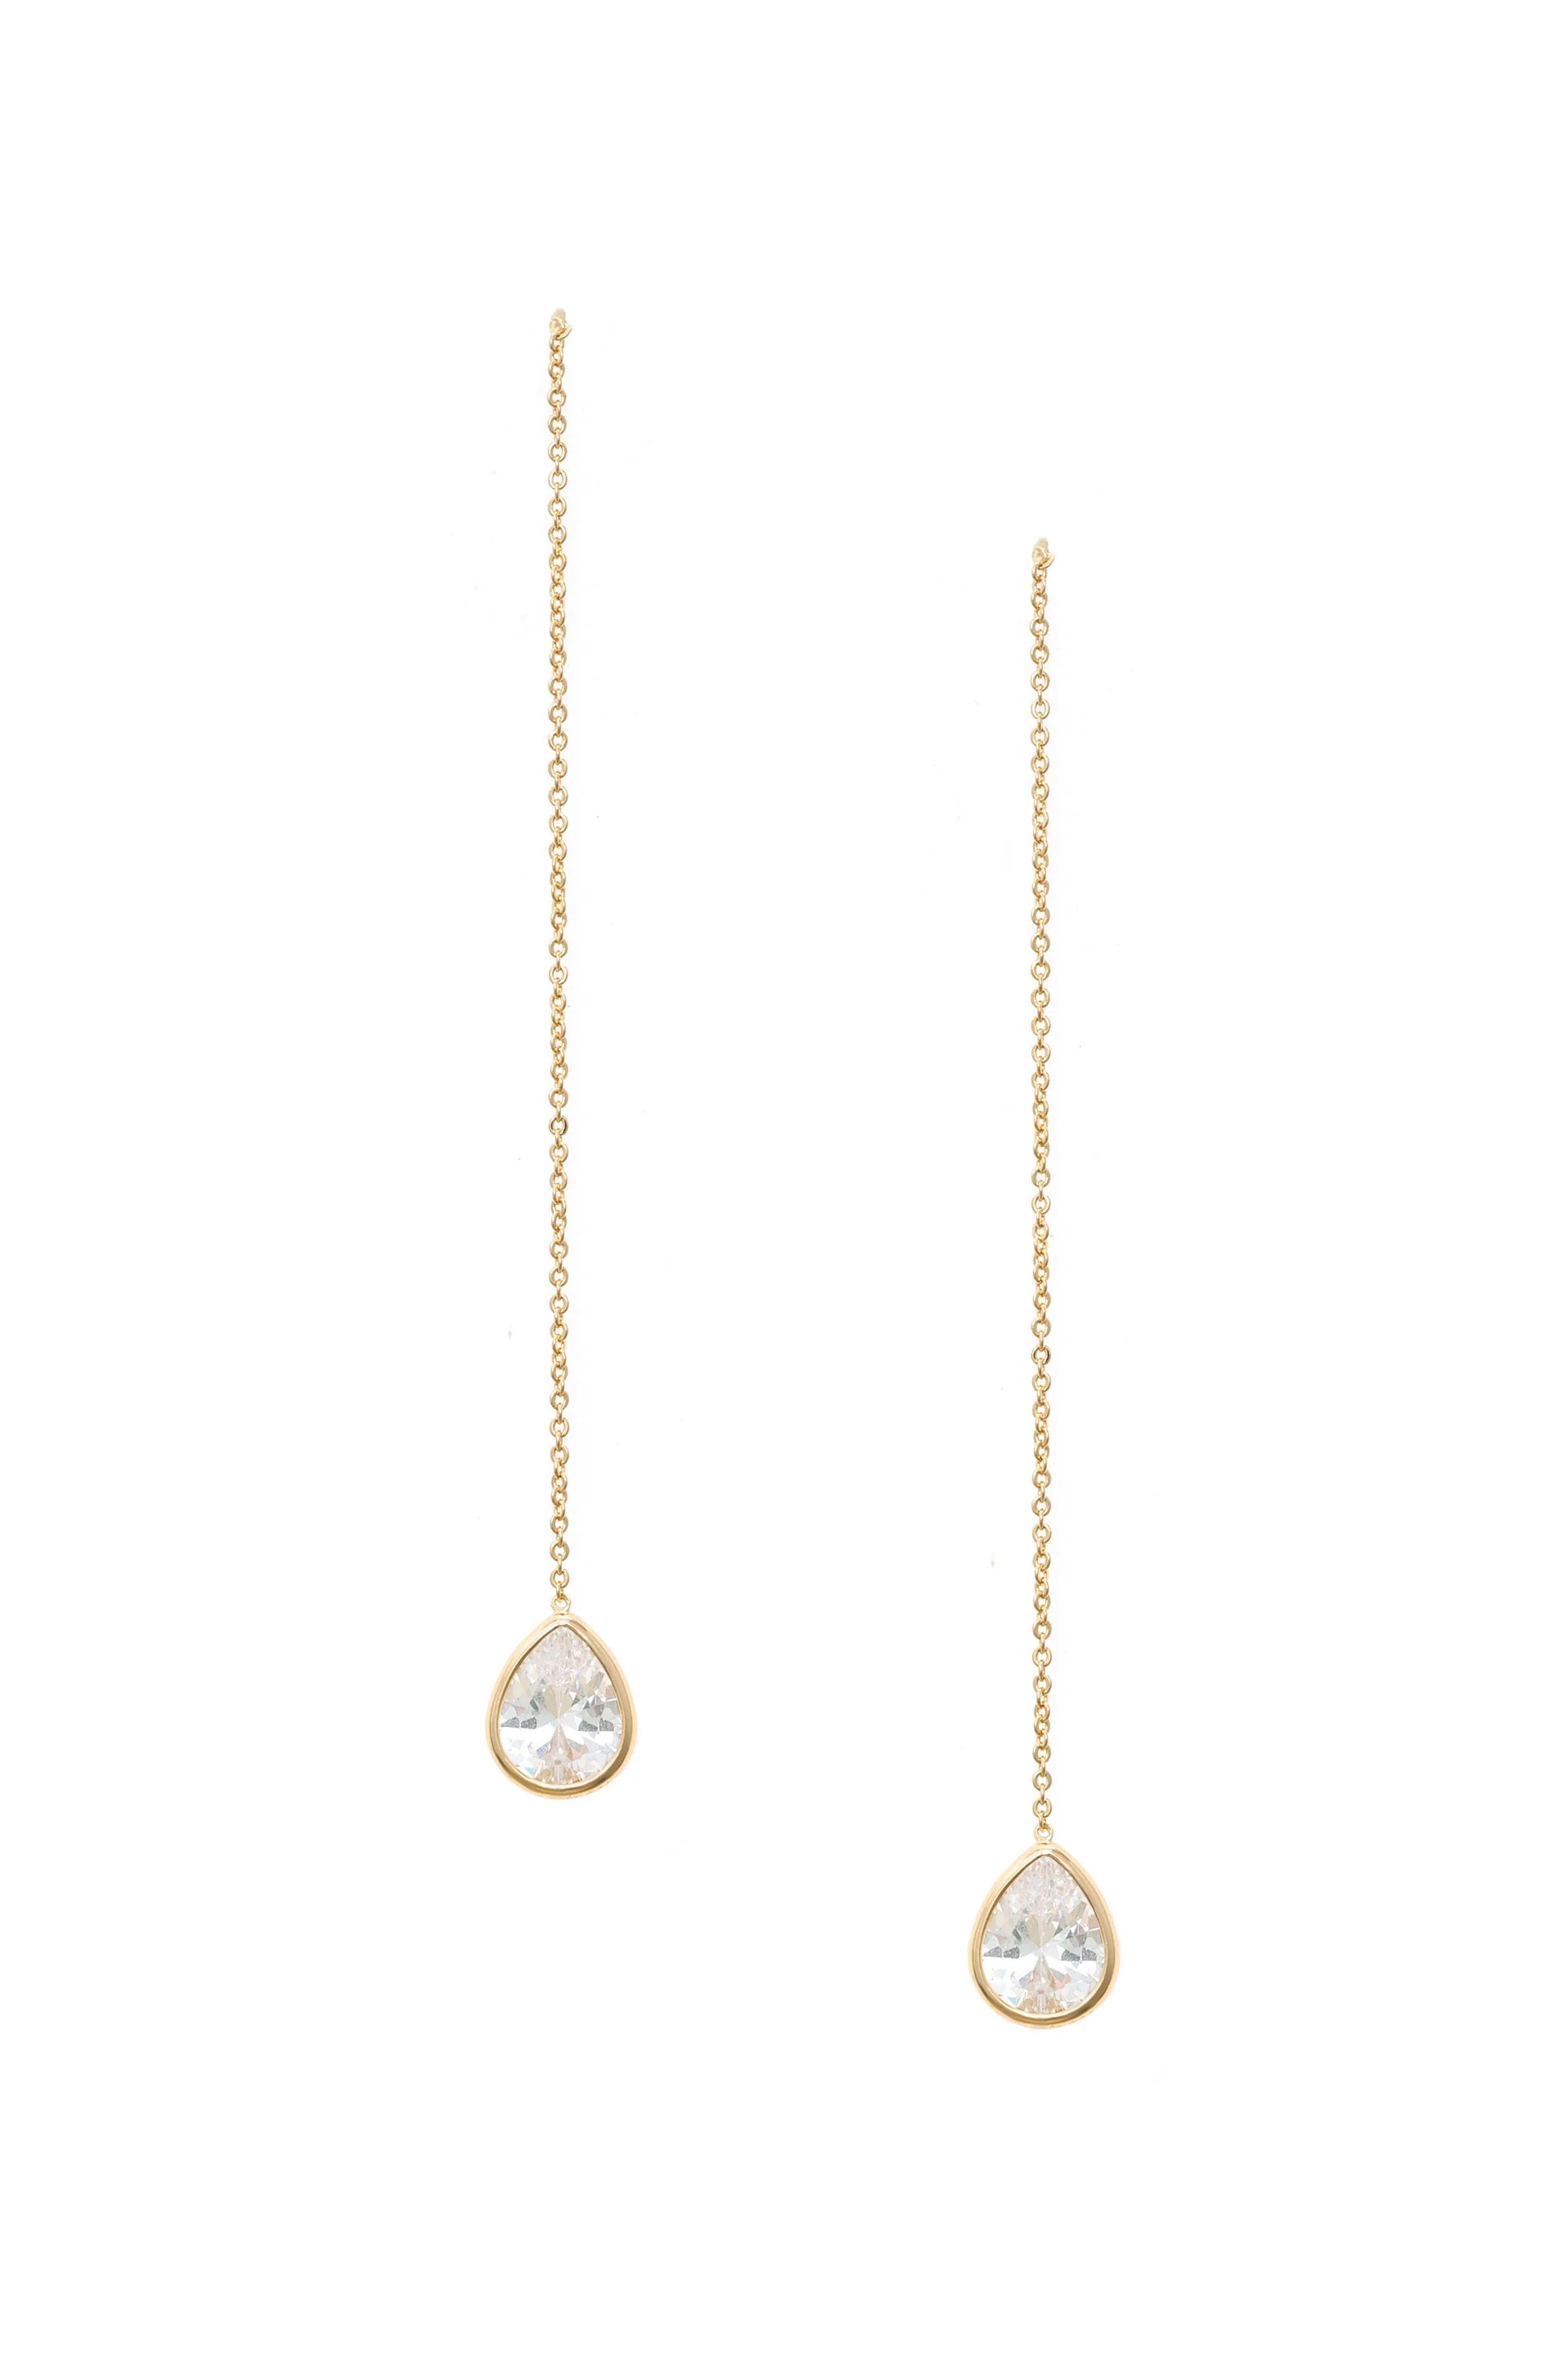 Barely there crystal dangle earrings